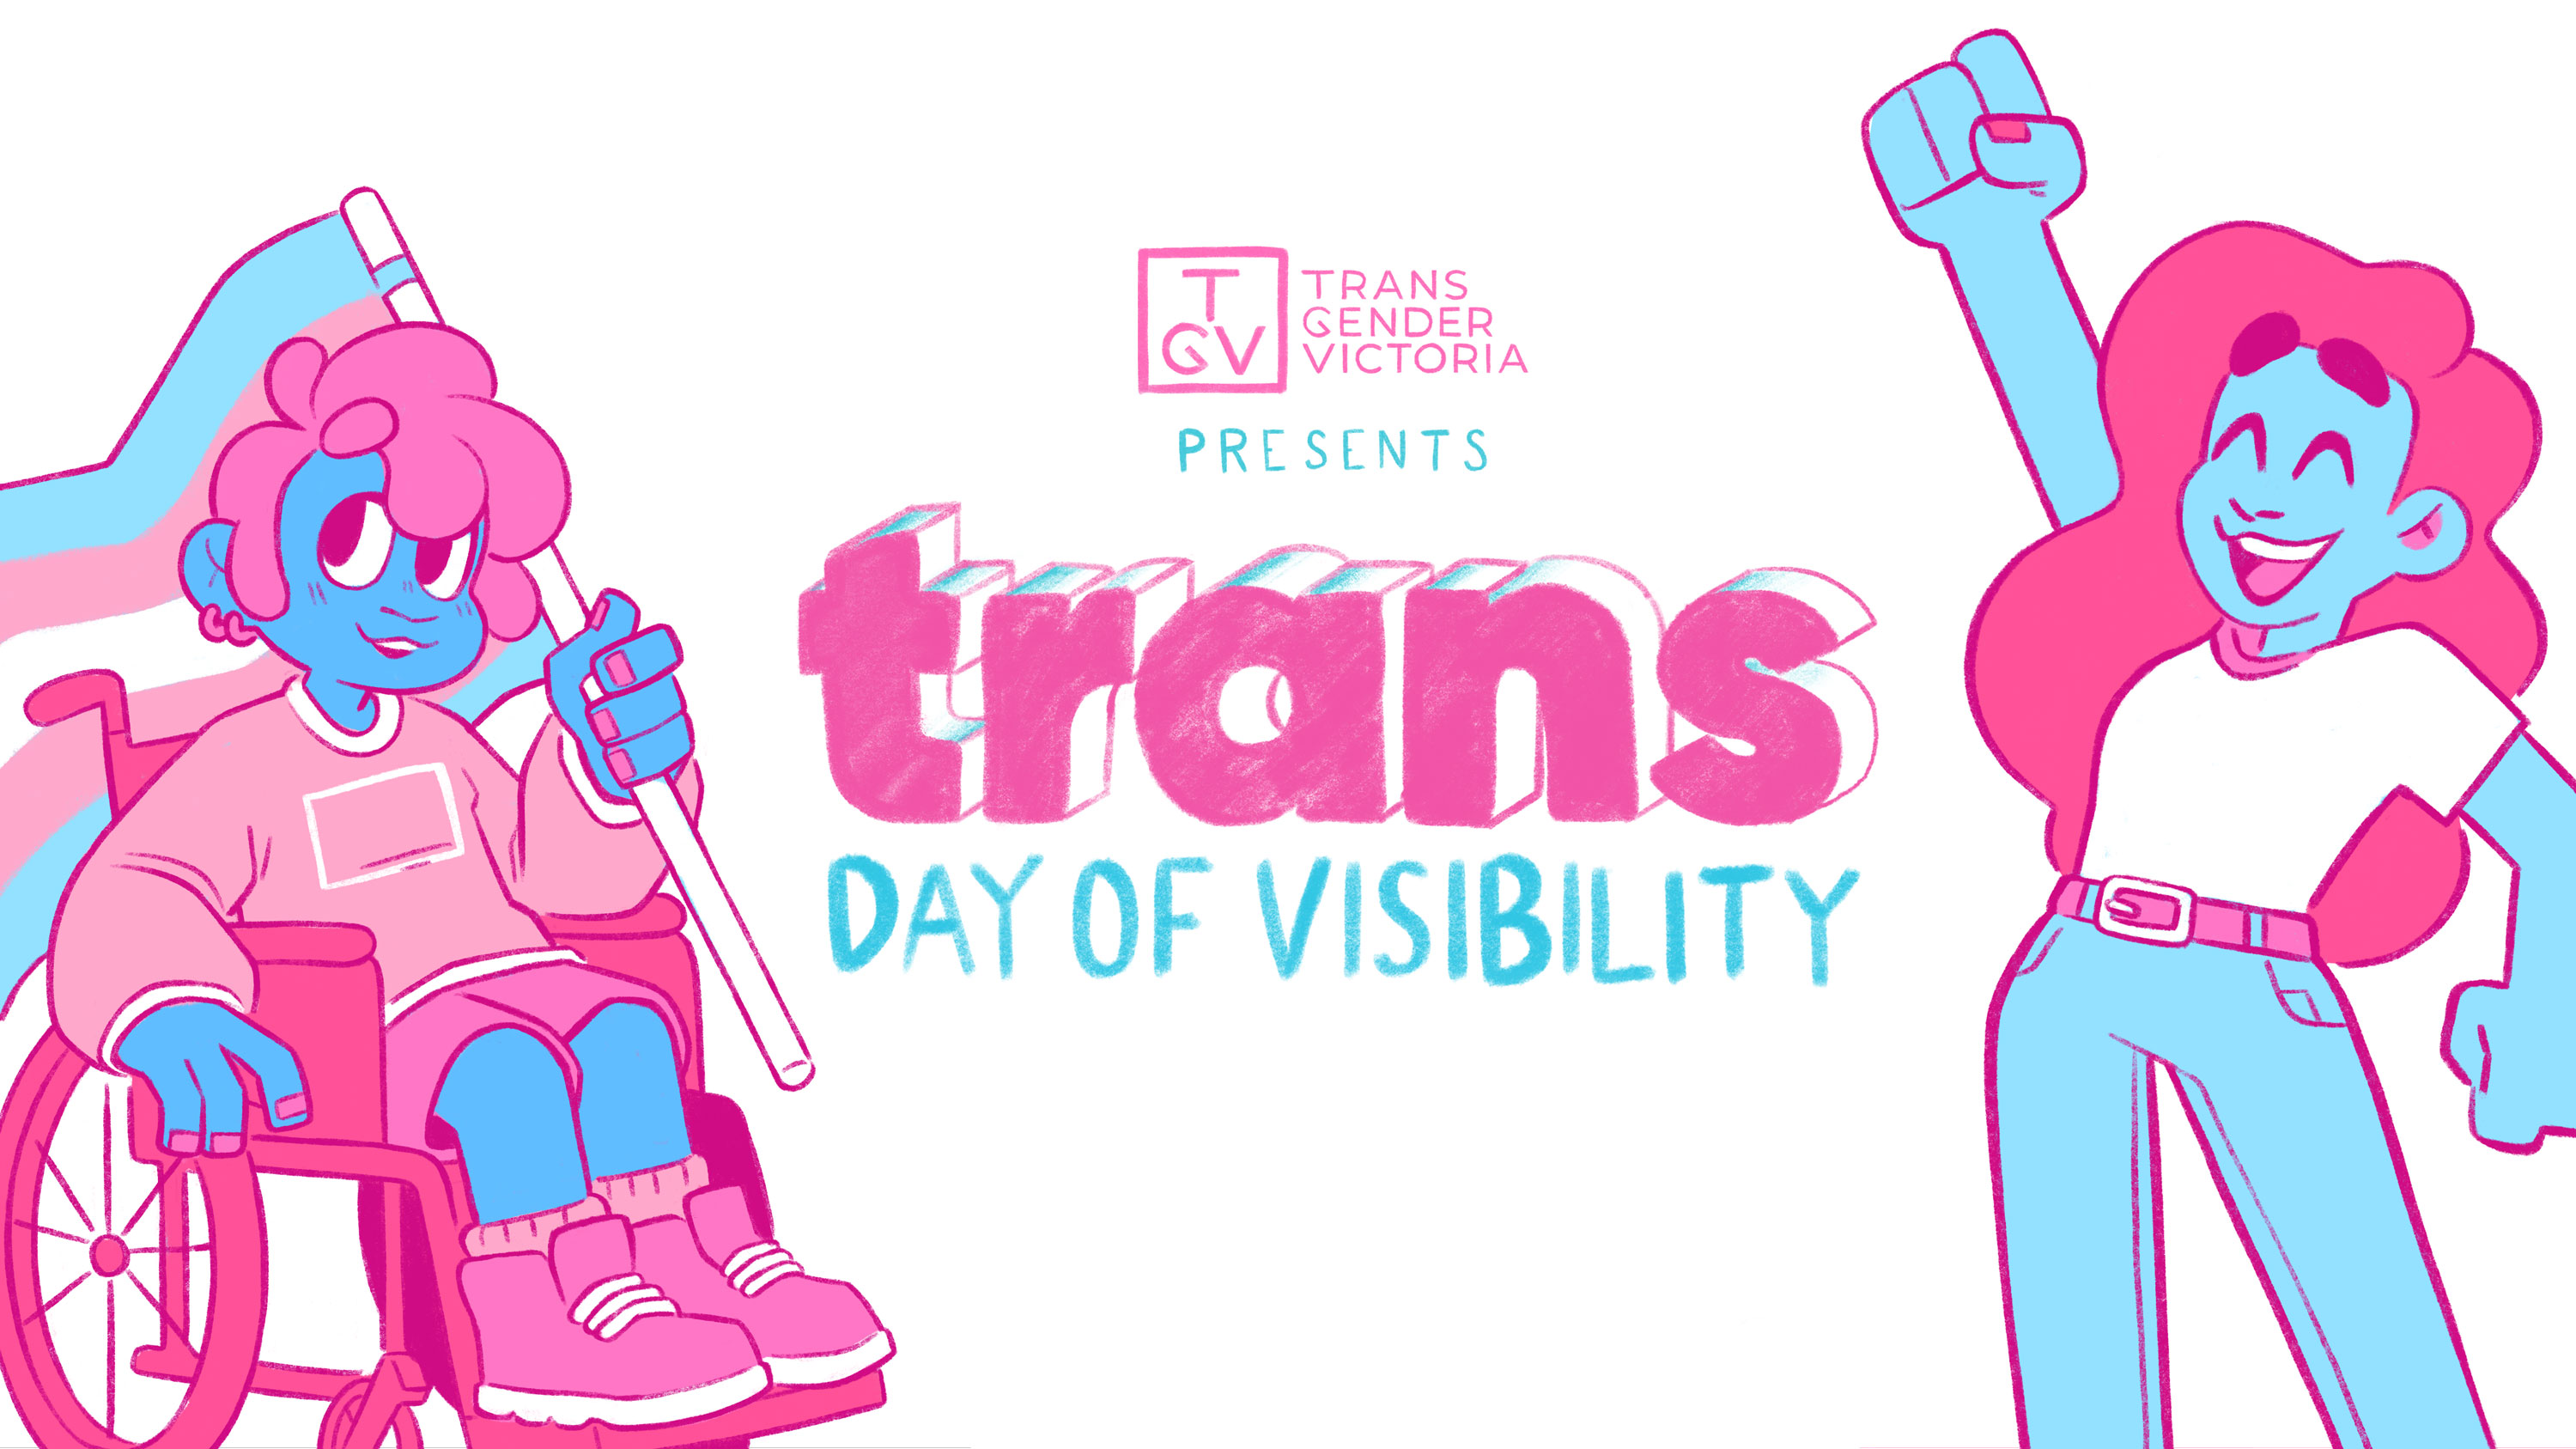 Transgender Victoria launches Trans Day of Visibility campaign for 2019